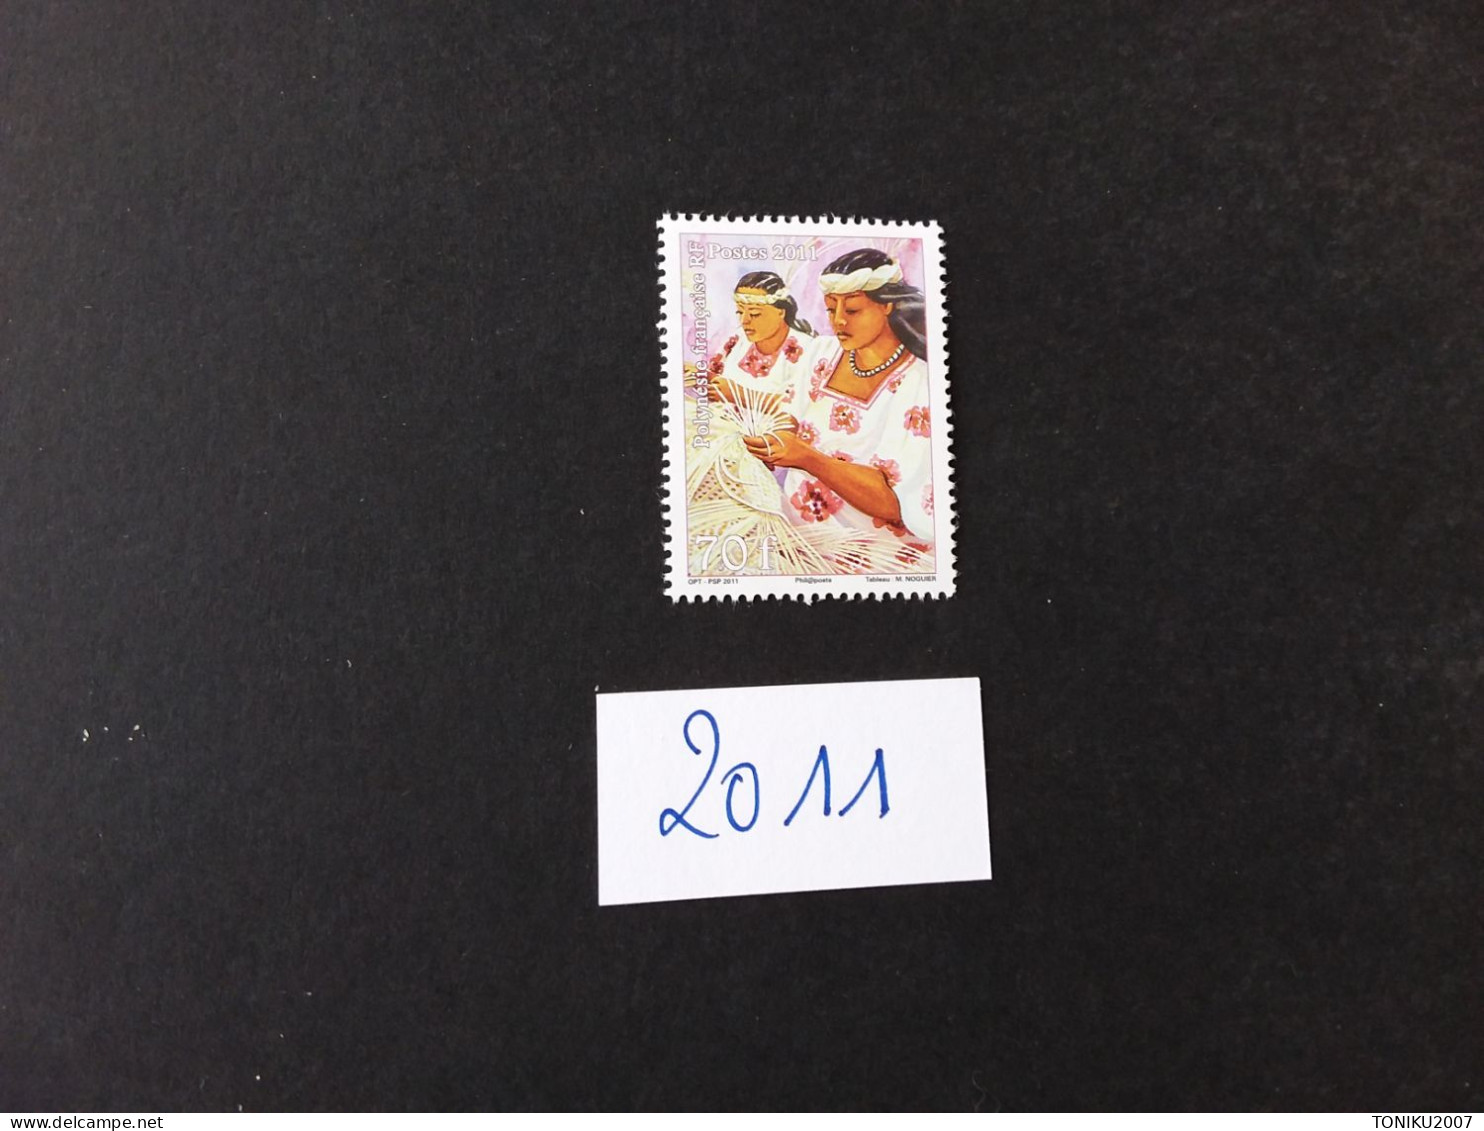 POLYNESIE FRANCAISE 2011** - MNH - Unused Stamps